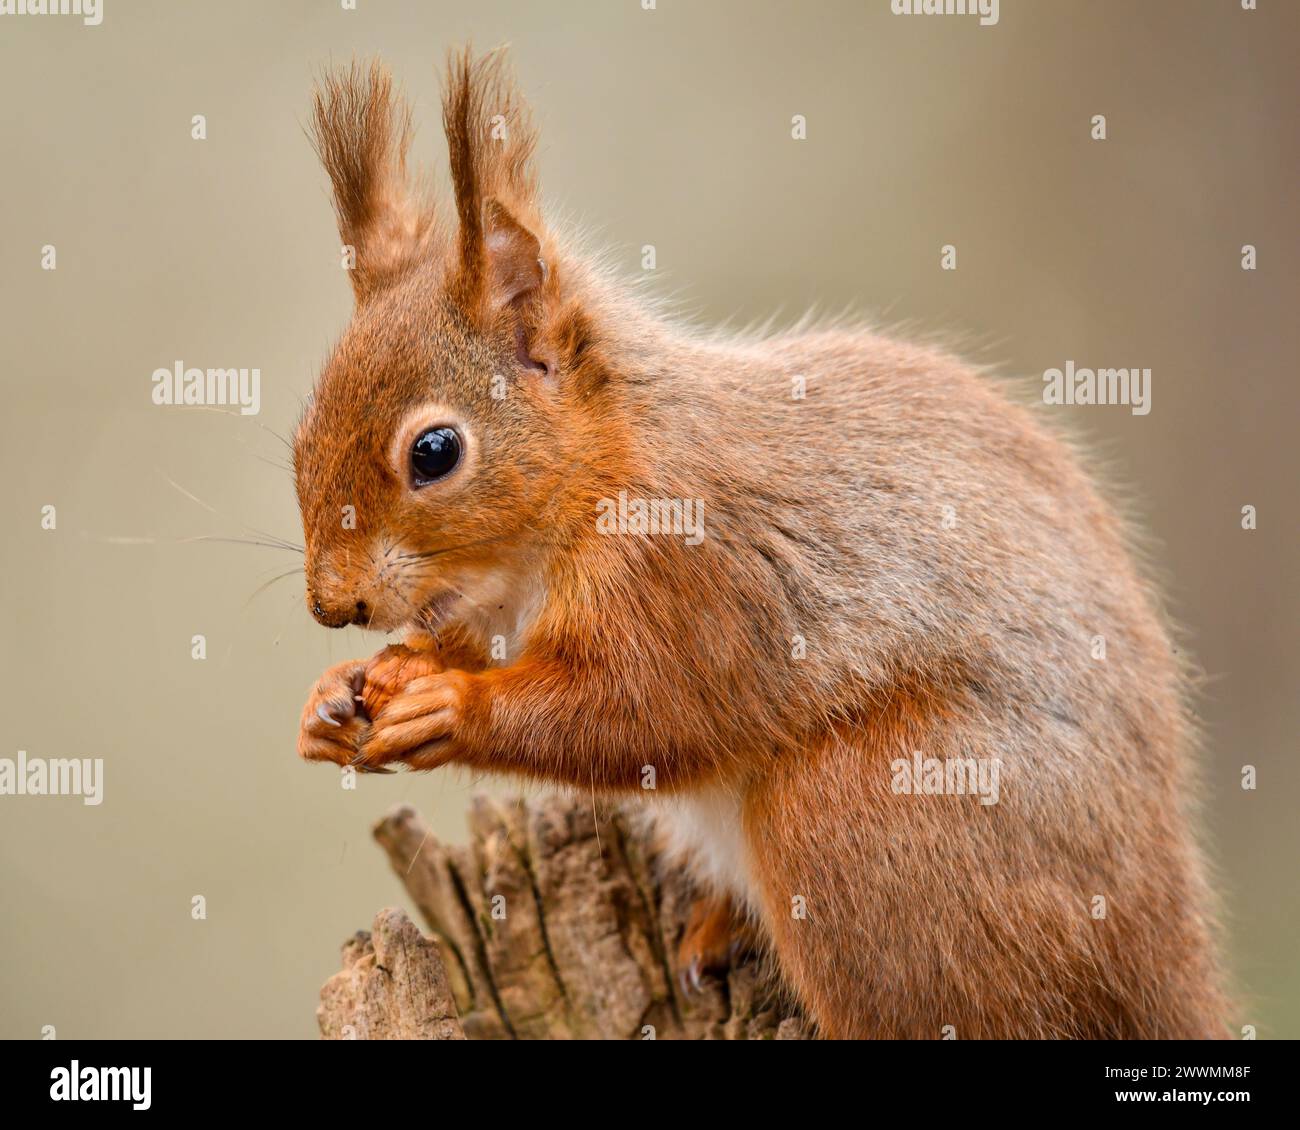 Cute and endangered Red Squirrel Stock Photo